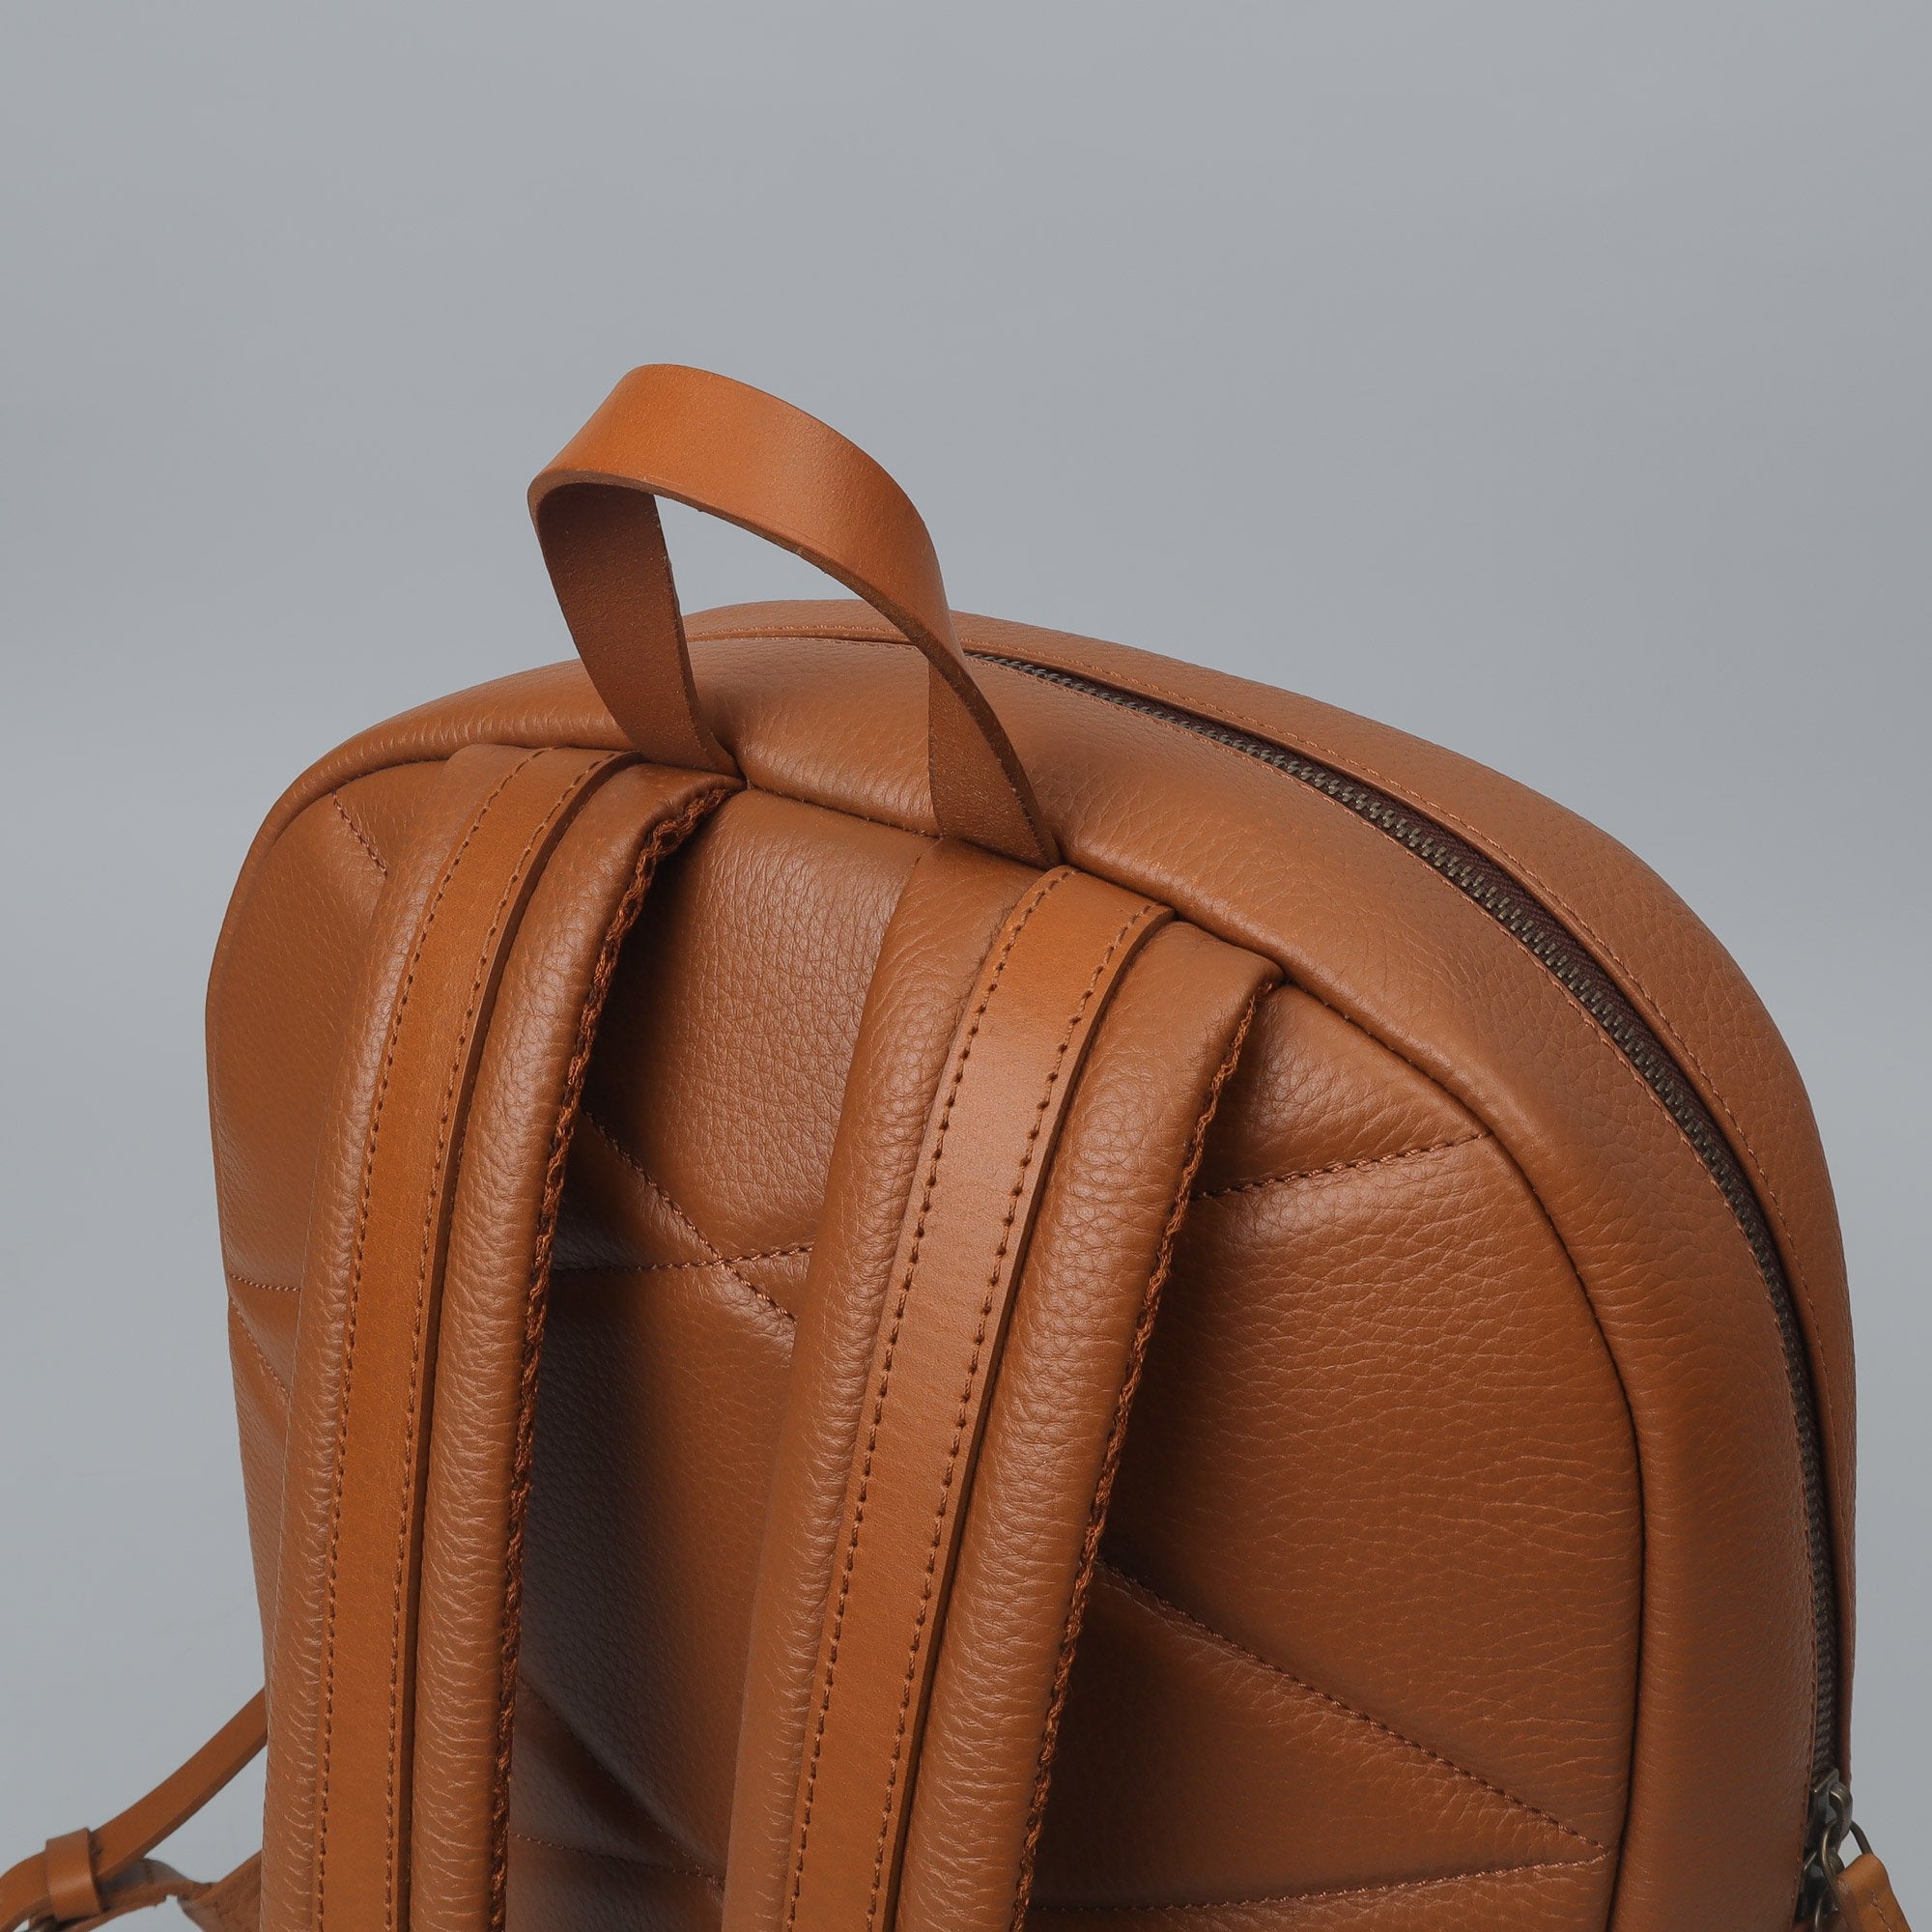 Tan leather backpack for women